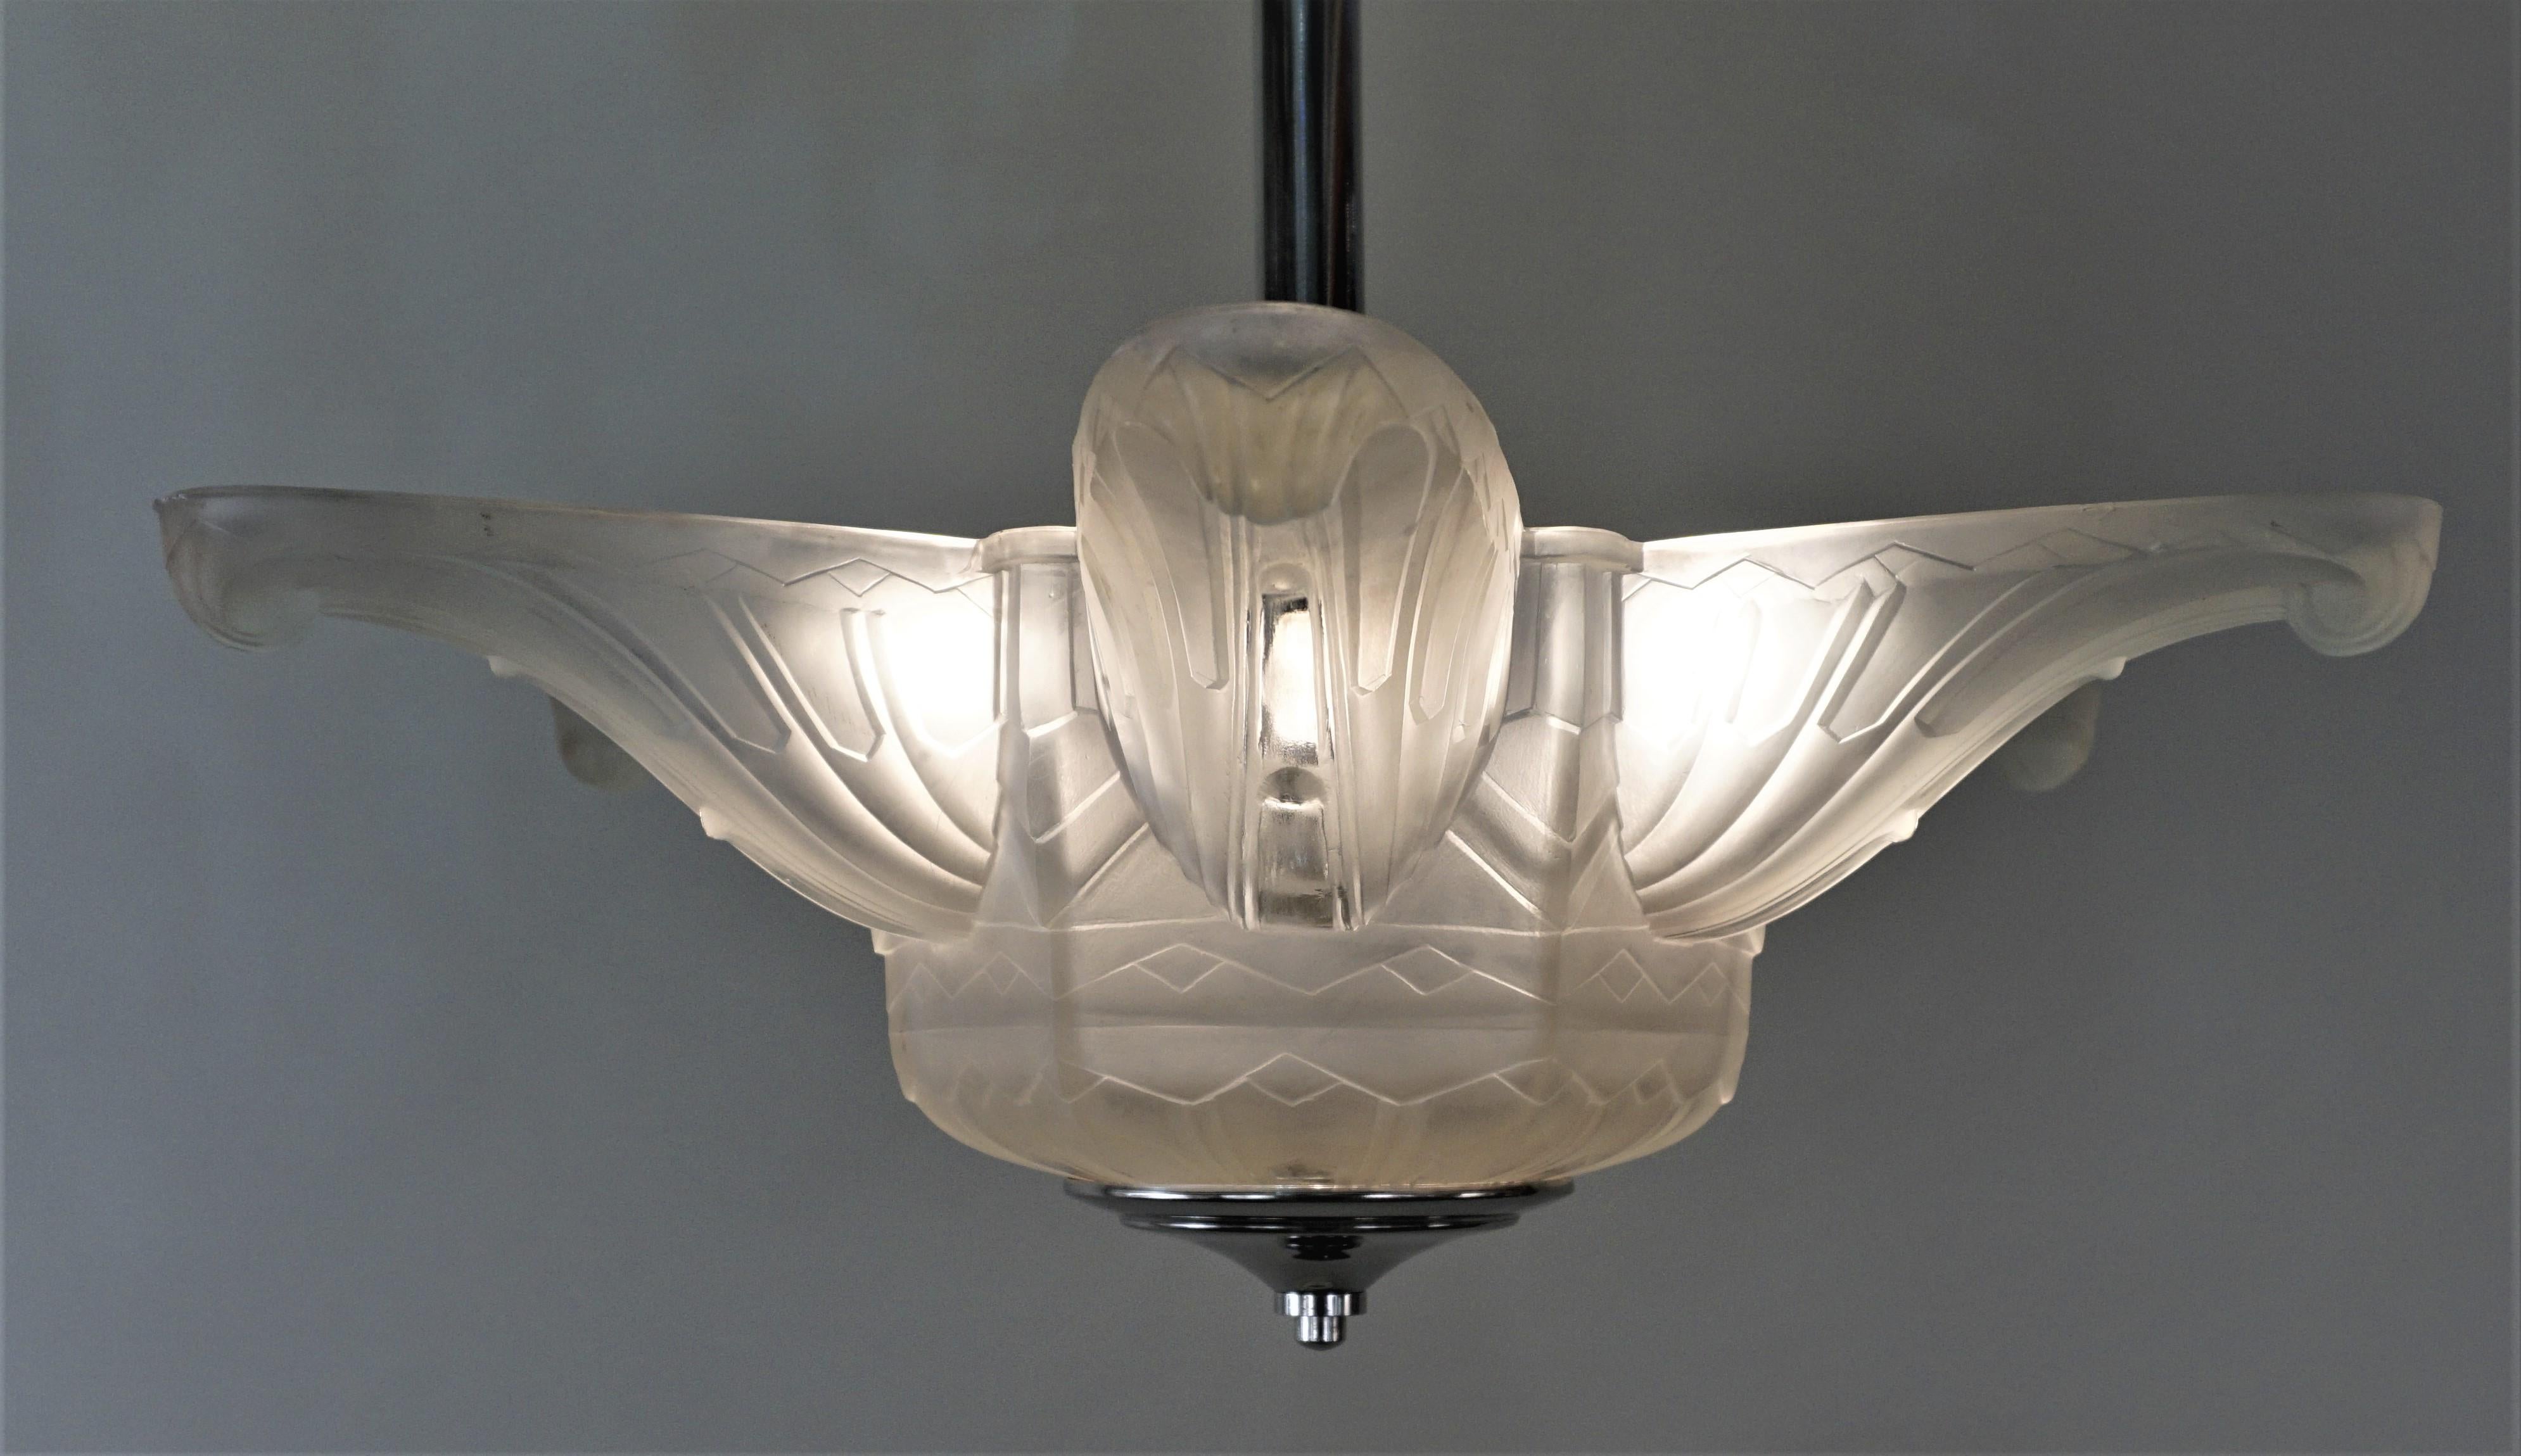 An elegant French Art Deco chandelier by Verrerie des Hanots. Total of six-light with nickel on bronze canopy and hardware.
If you desire shorter height we will be glad to adjust the rod for you.